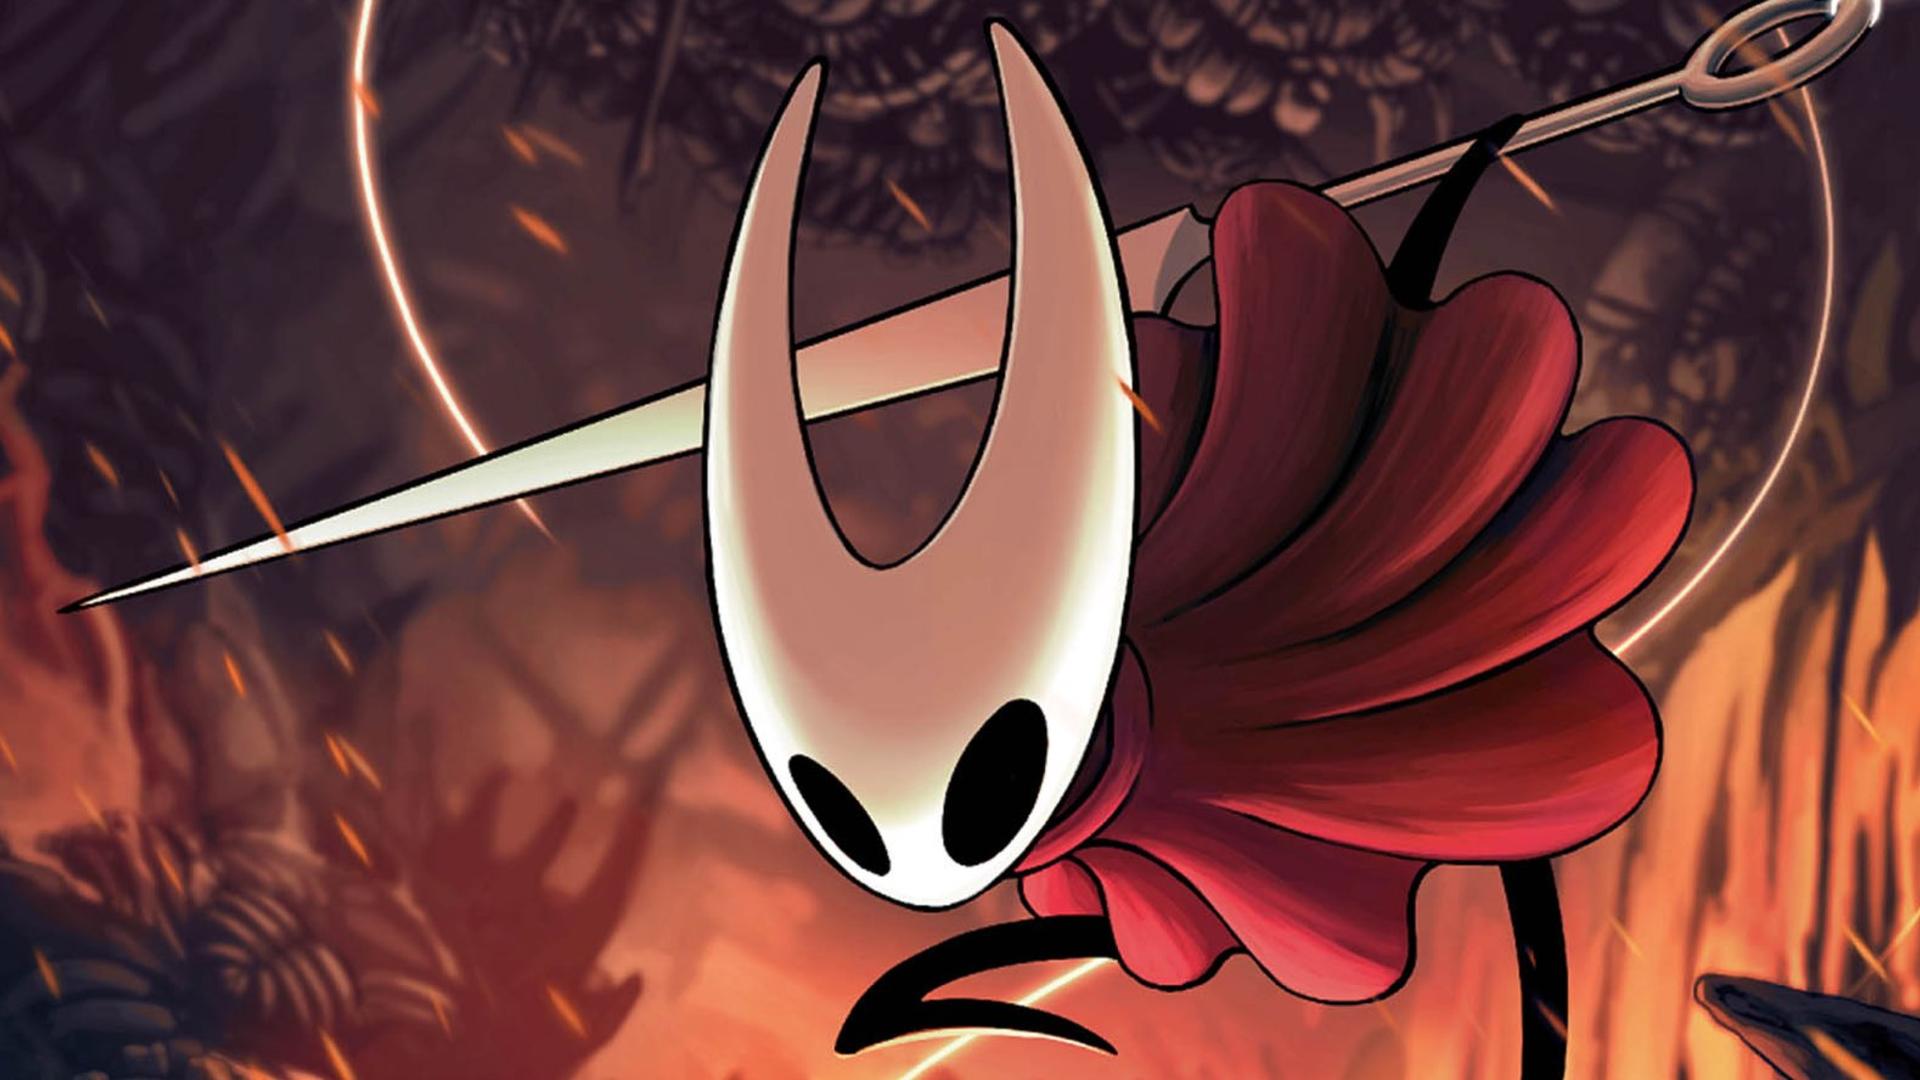 how to play silksong in hollow knight